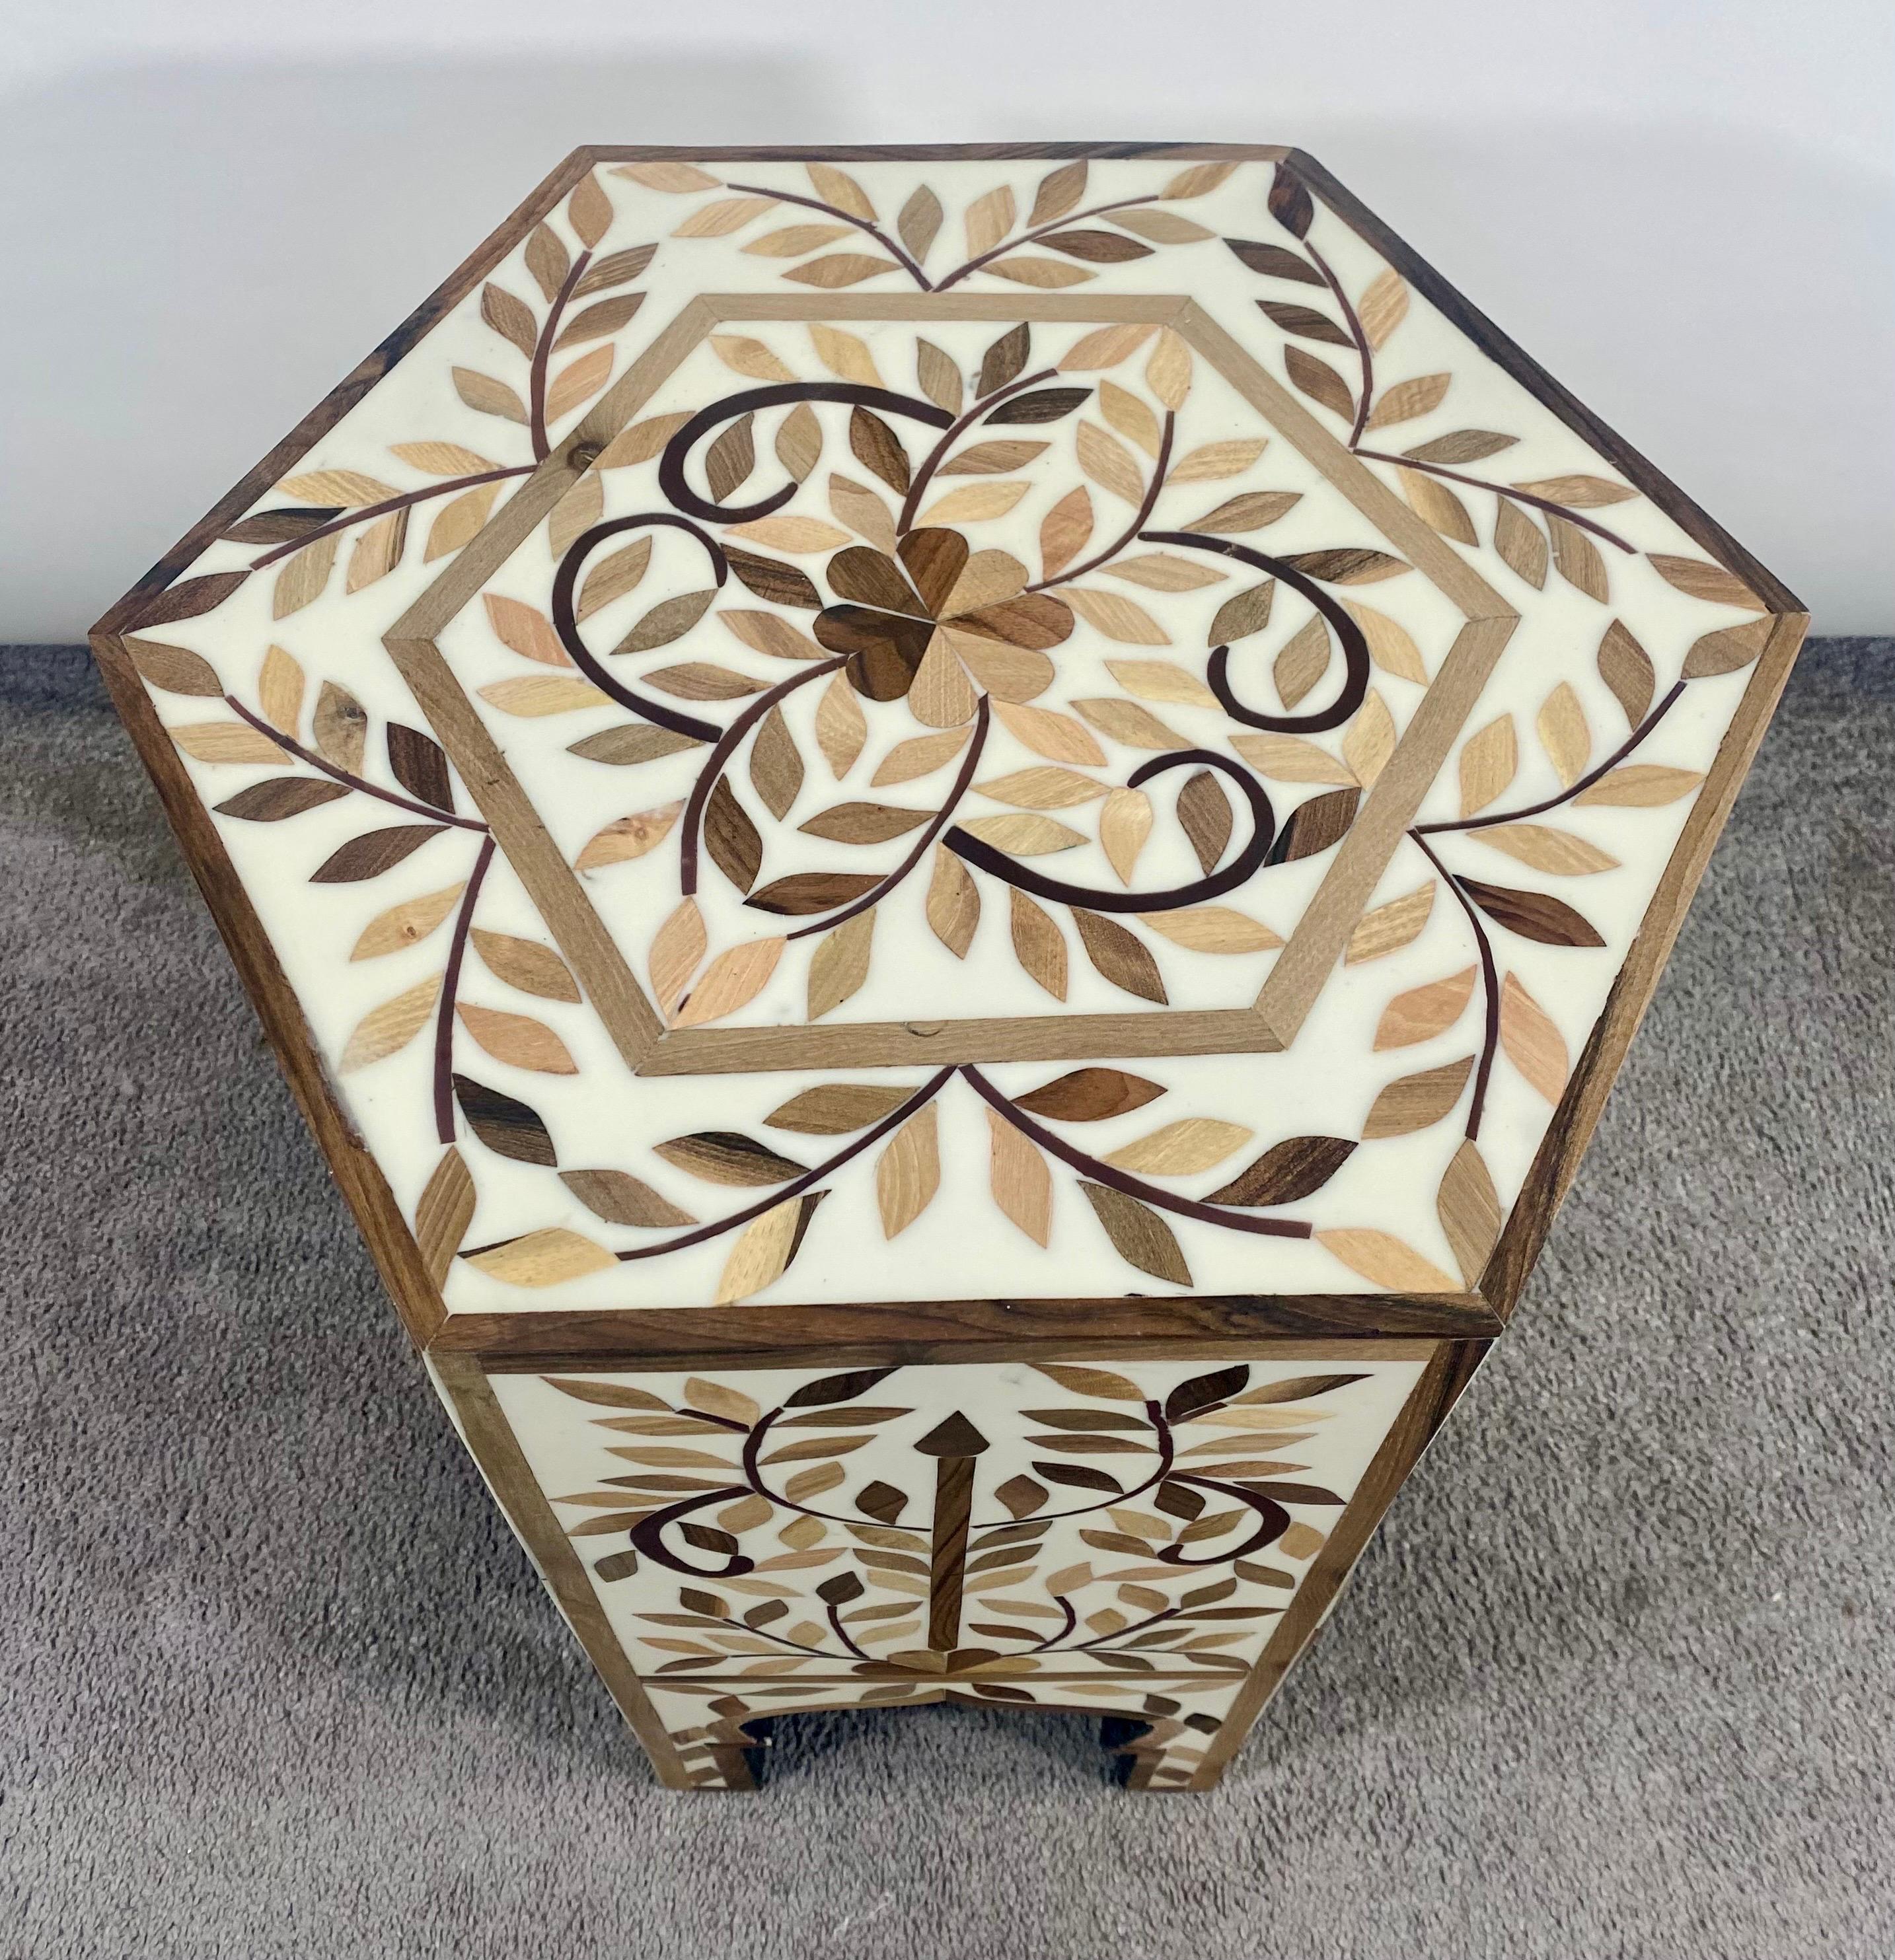 Moroccan Boho Chic Leaf Design Resin & Walnut Hexagonal Side or End Table, Pair For Sale 2